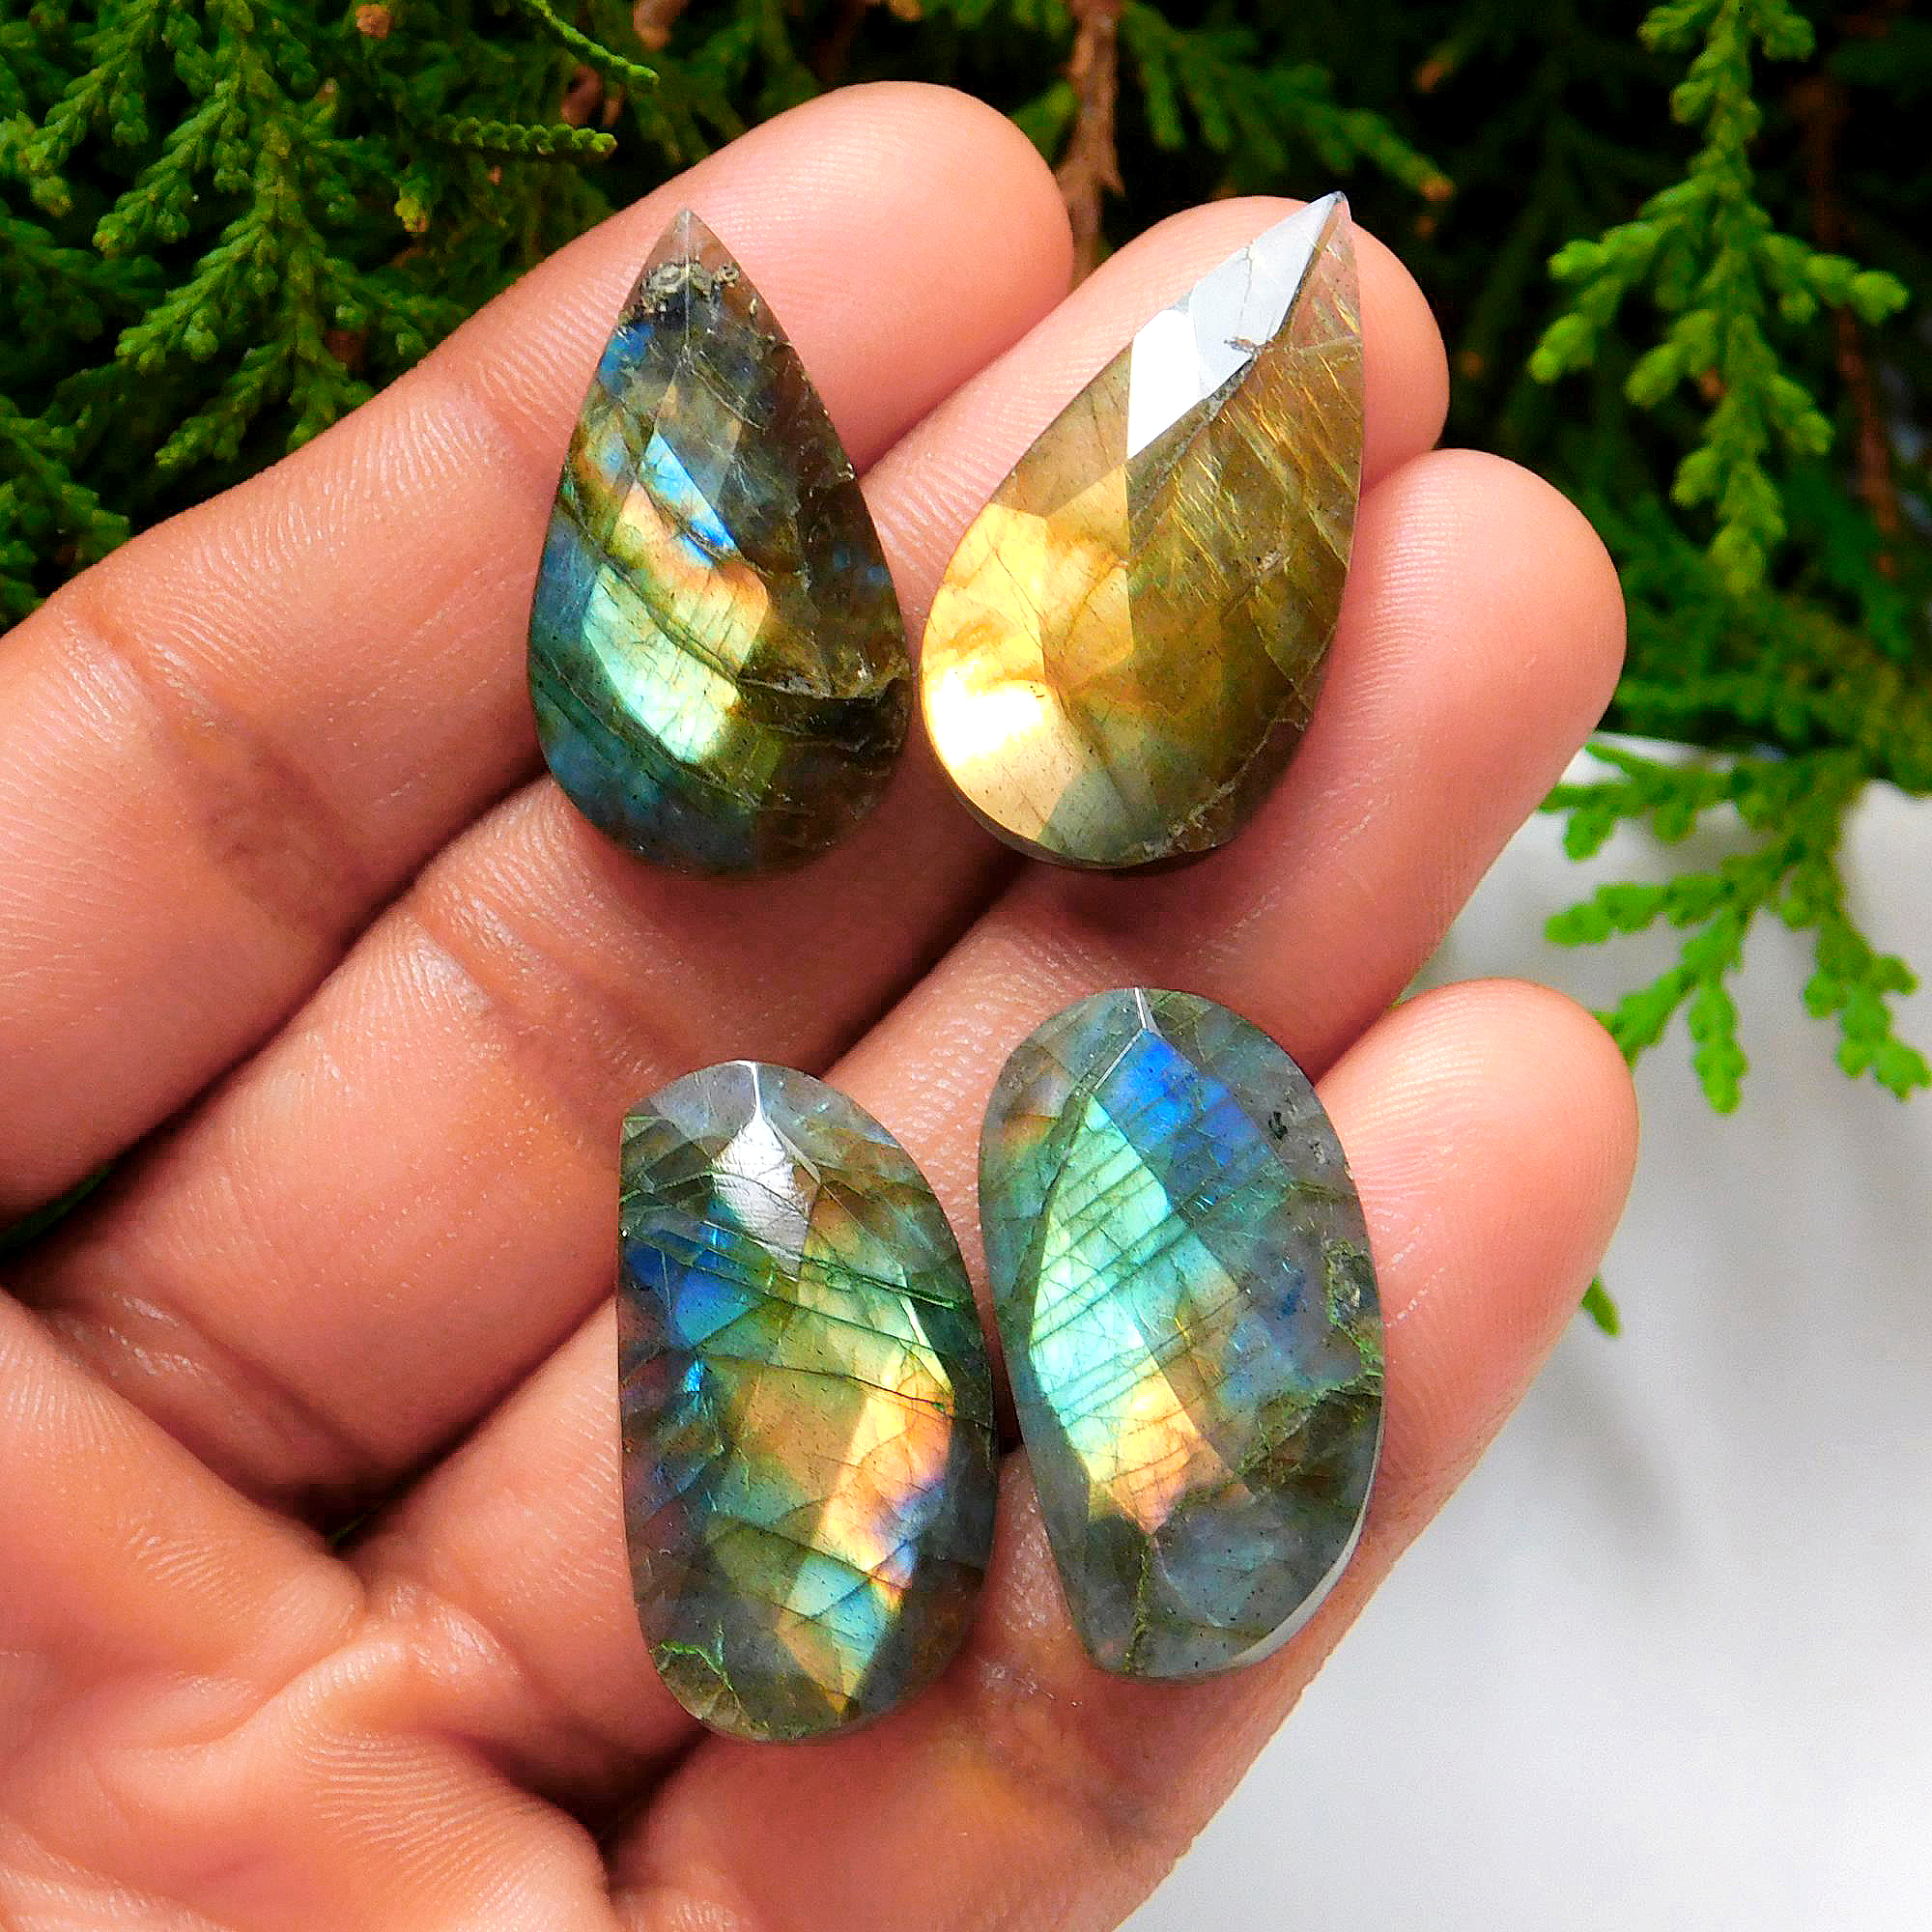 5 Pair 144 Cts Natural Faceted Labradorite Mix pair Cabochons Loose Gemstone Wholesale Lot Size 32x10 23x15mm